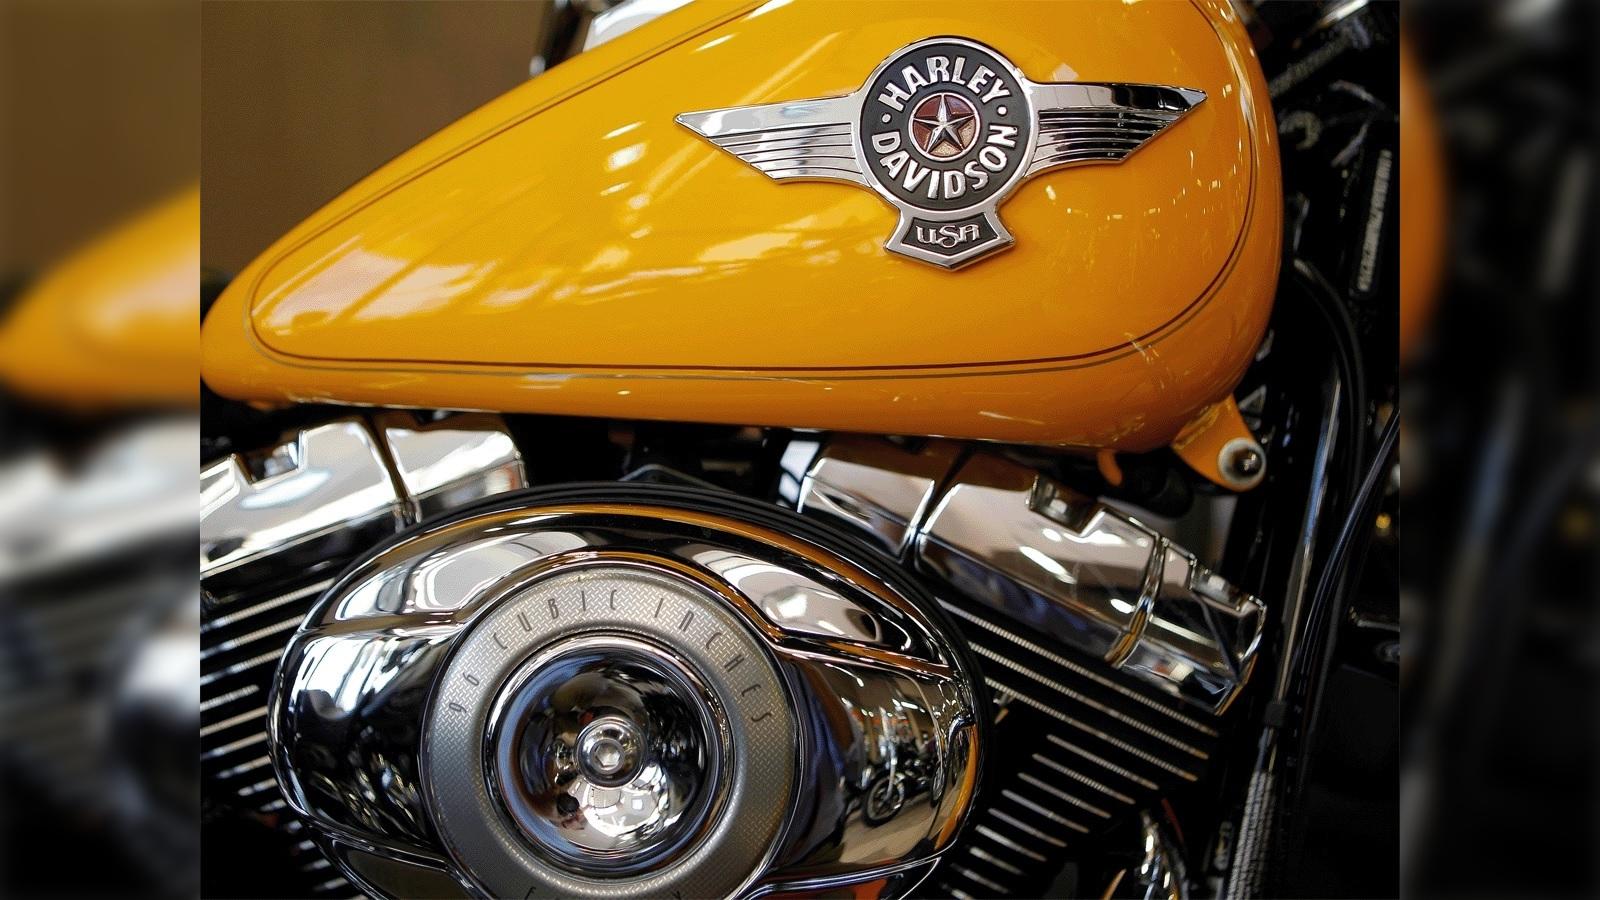 How Harley-Davidson lost its rumble in India - The Economic Times